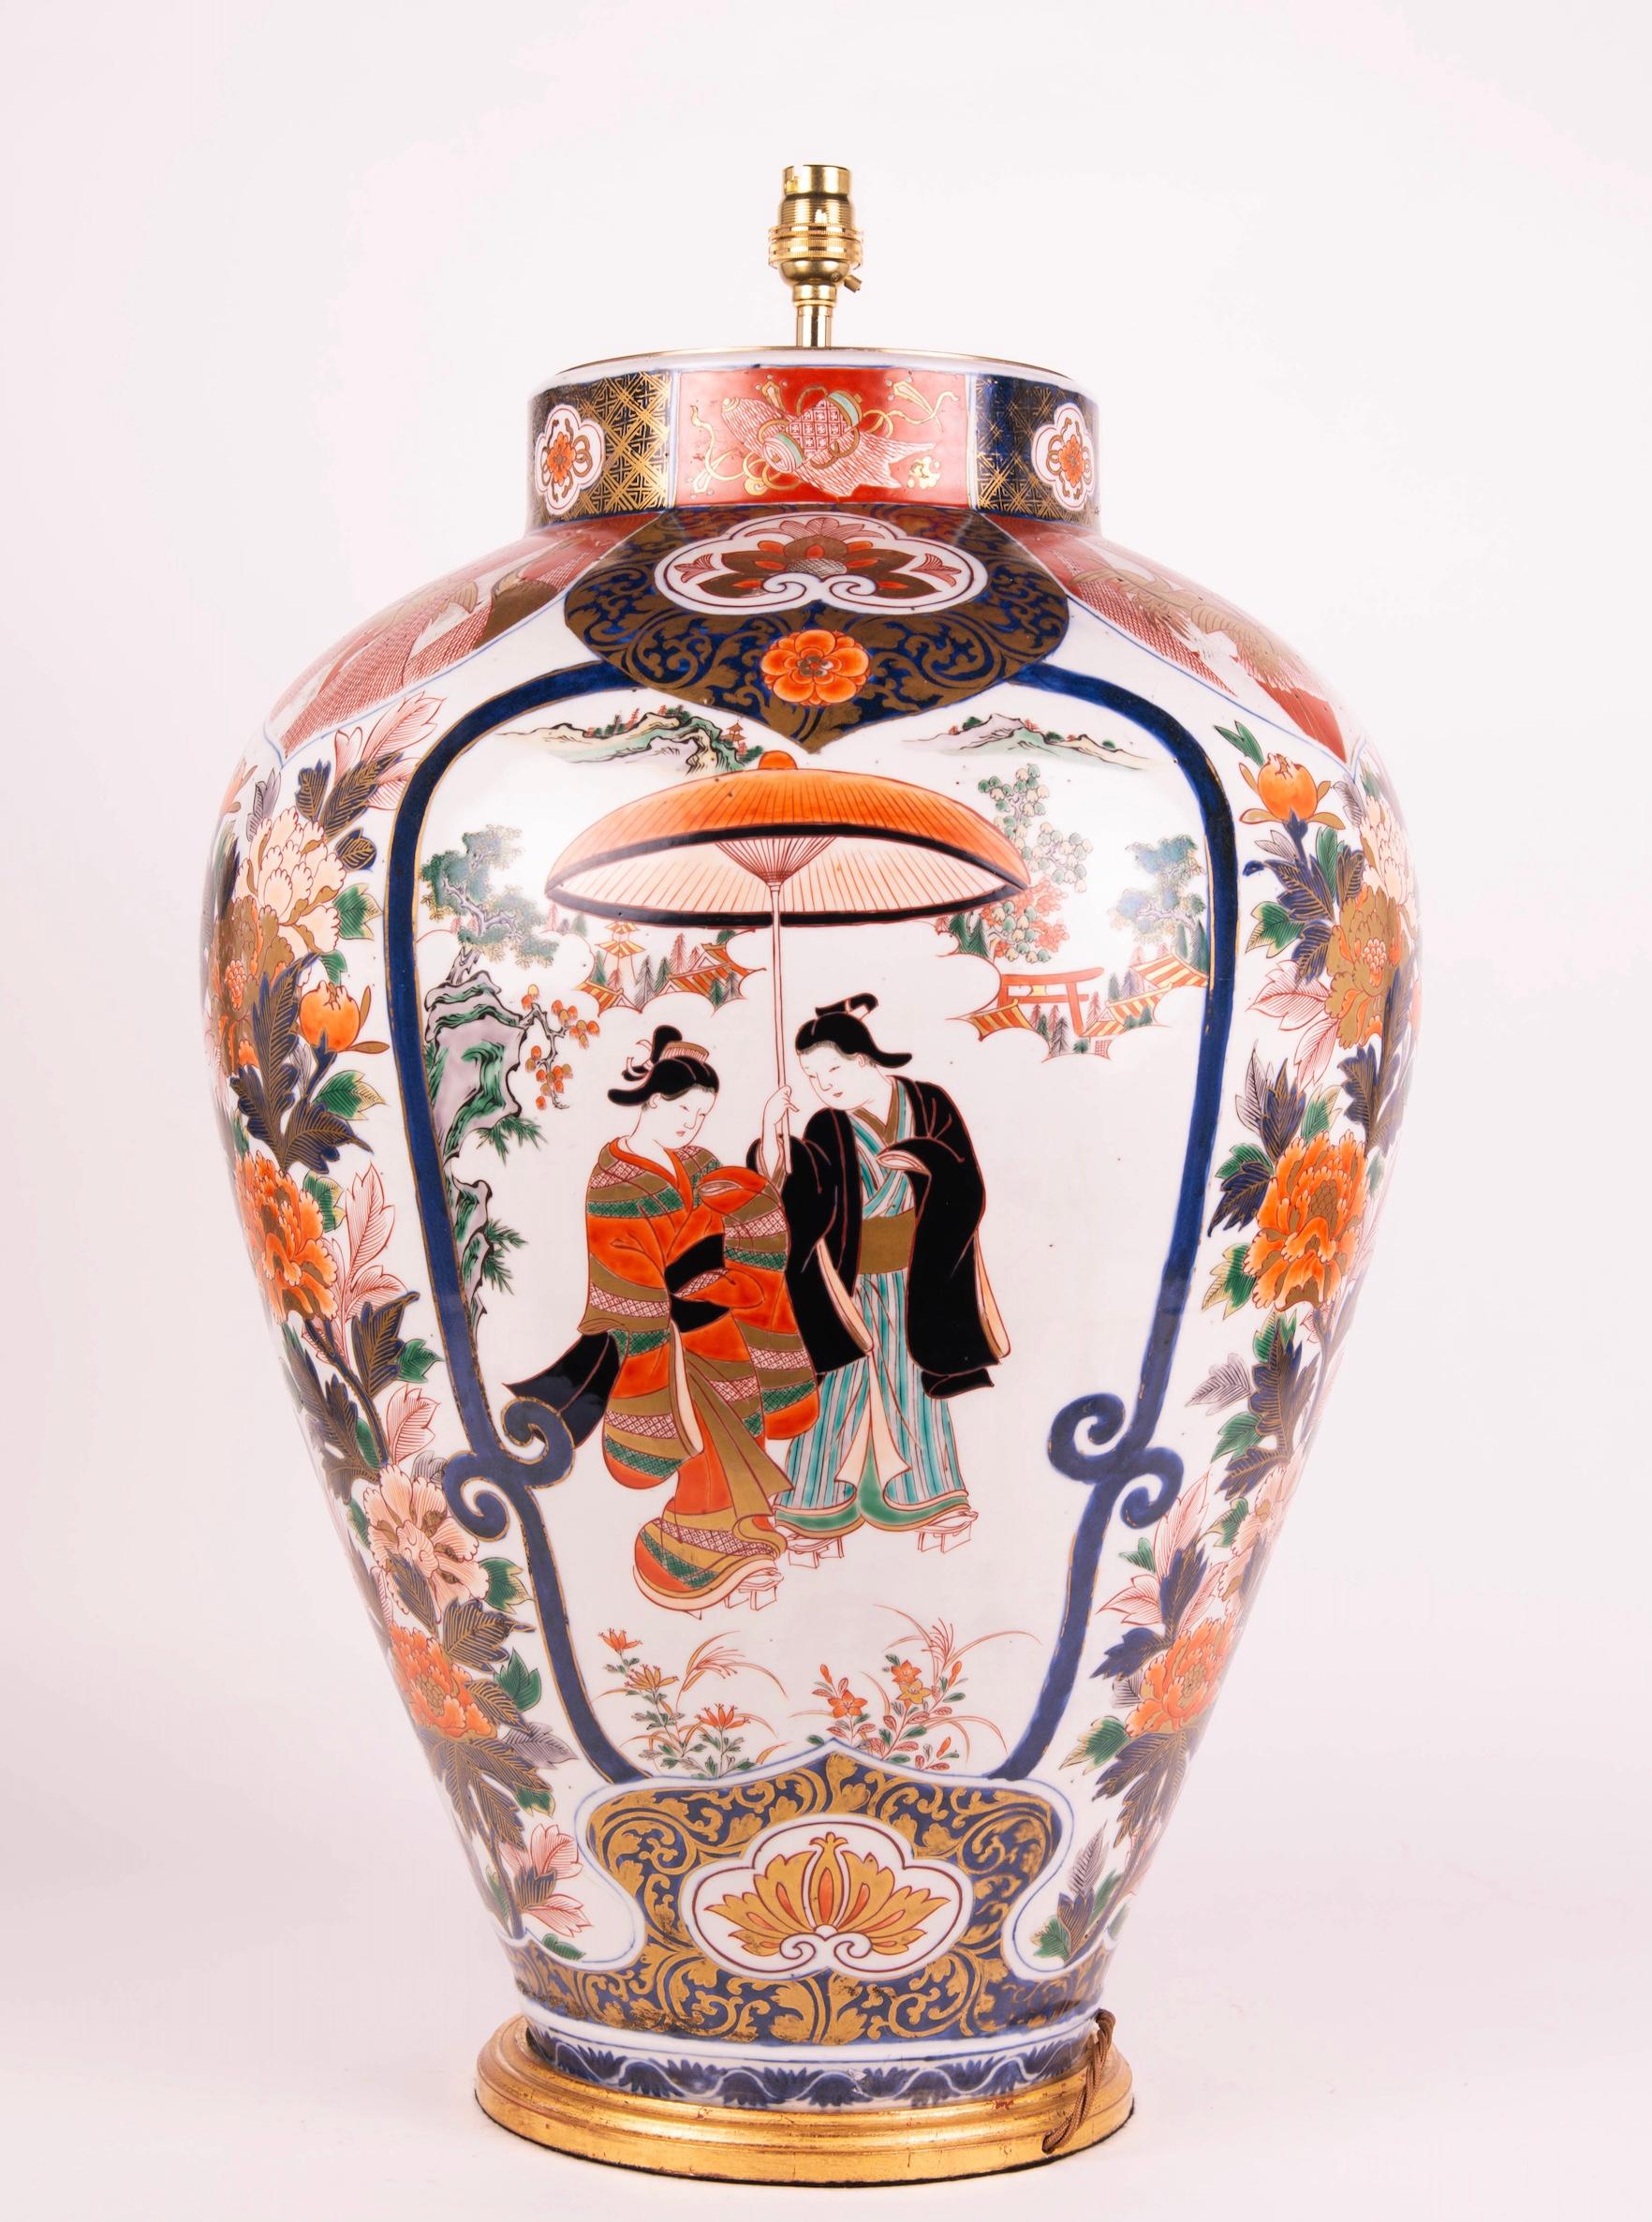 A superb very large 19th century Japanese Imari vase, of baluster form, decorated in the typical Imari palette of iron reds and blue with gilt highlights, but also blacks and greens, on a predominantly white background, with cartouche panels